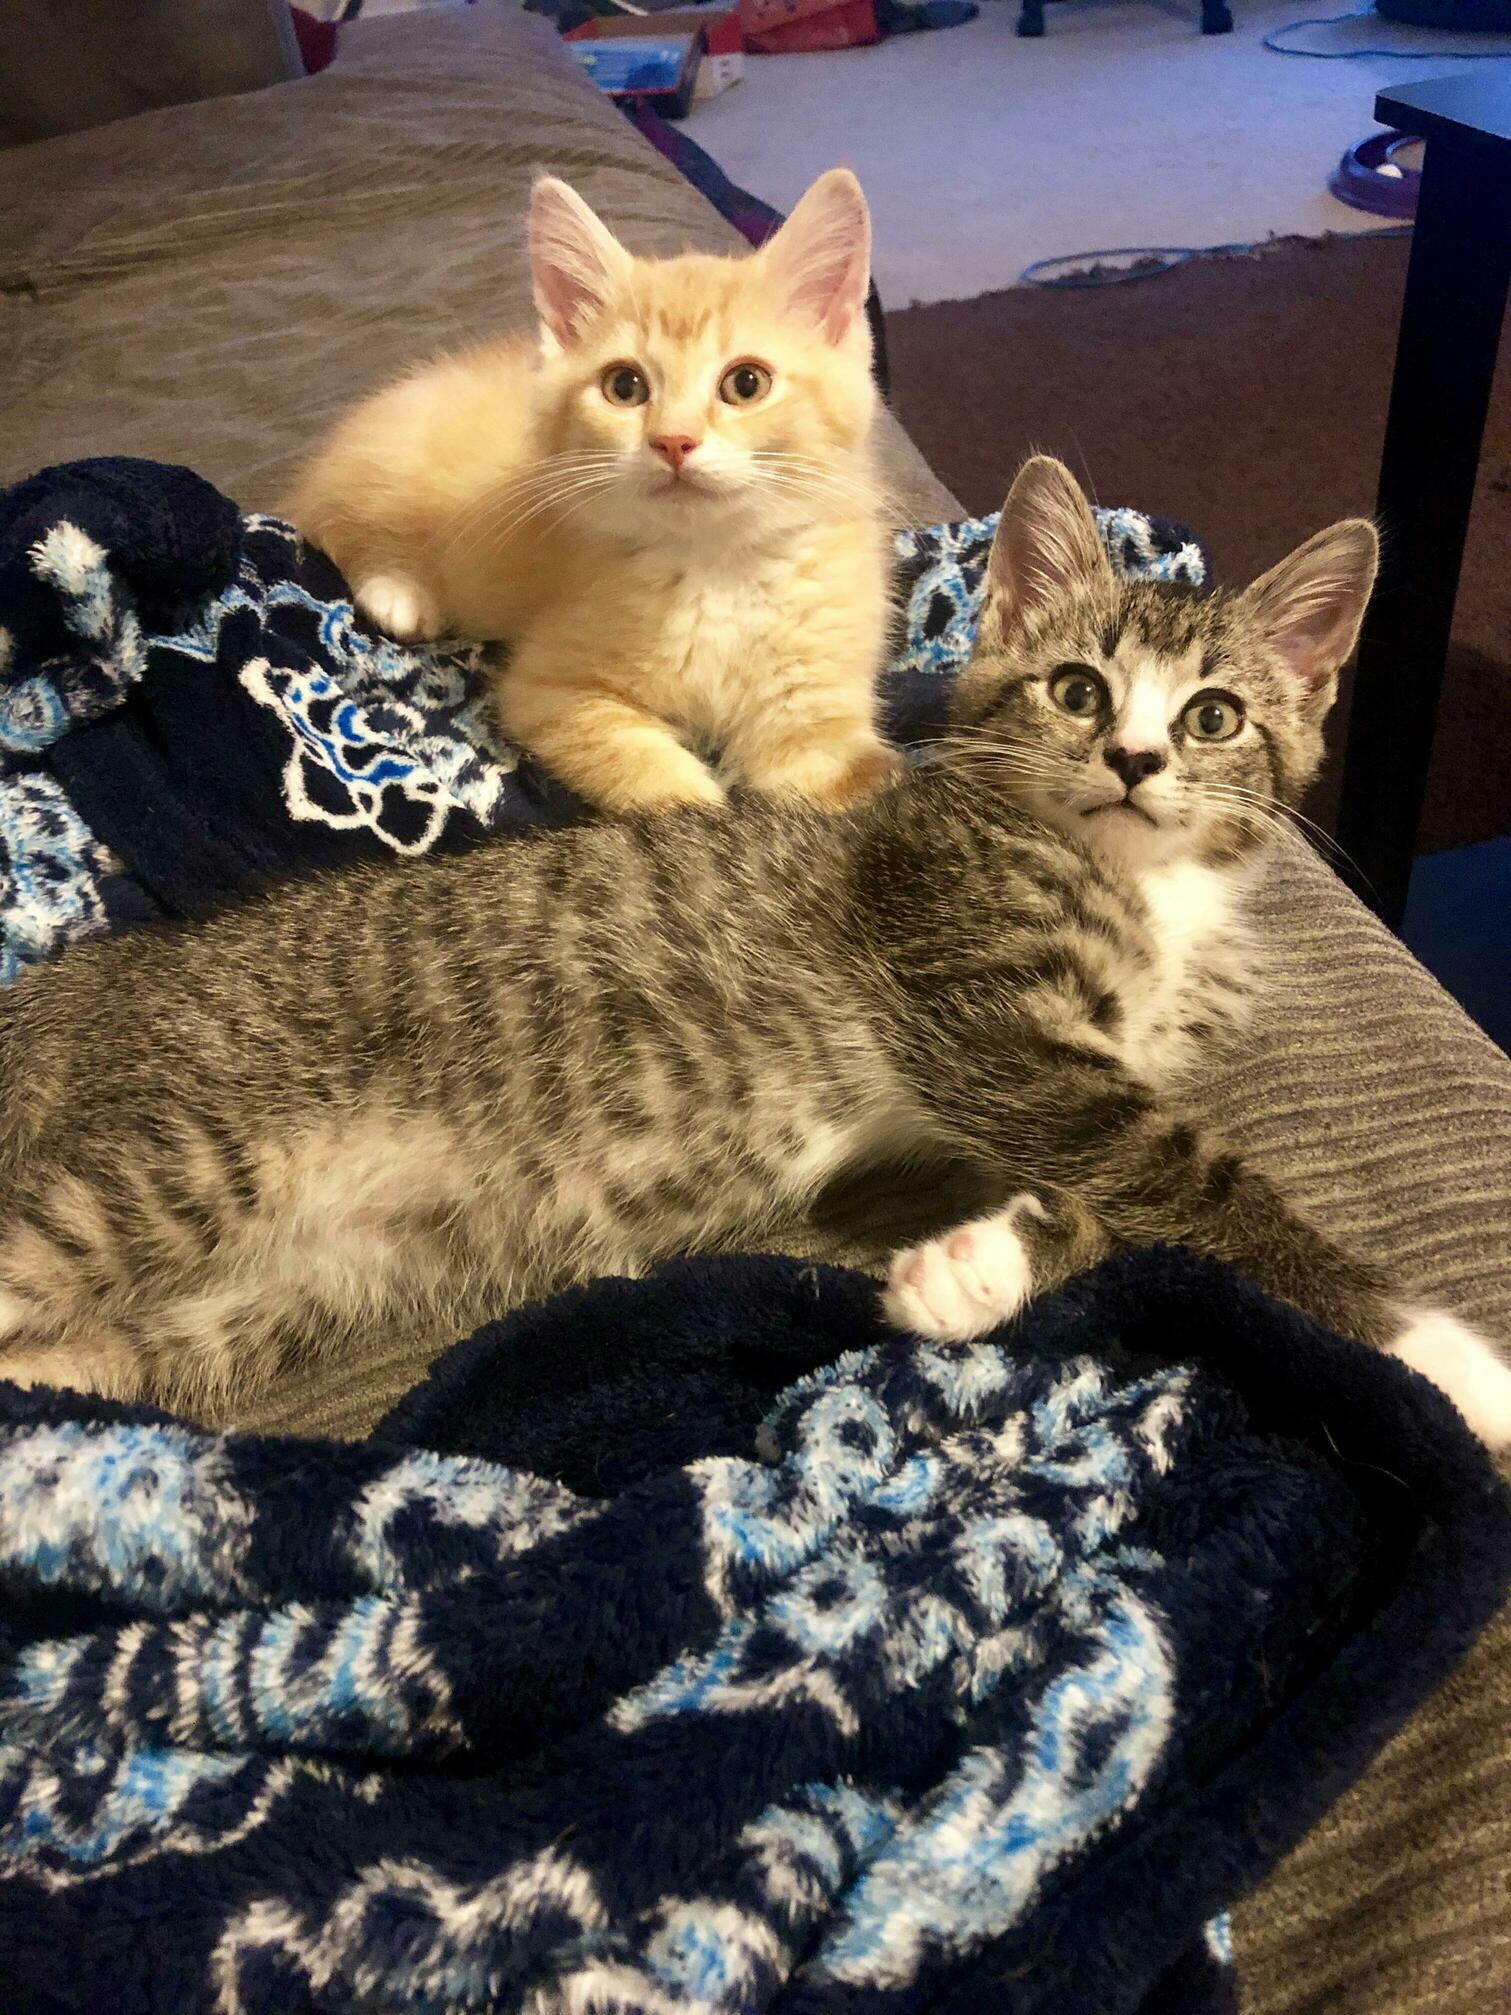 Brothers mutt and jeff. some of the sweetest foster kittens ive ever had!